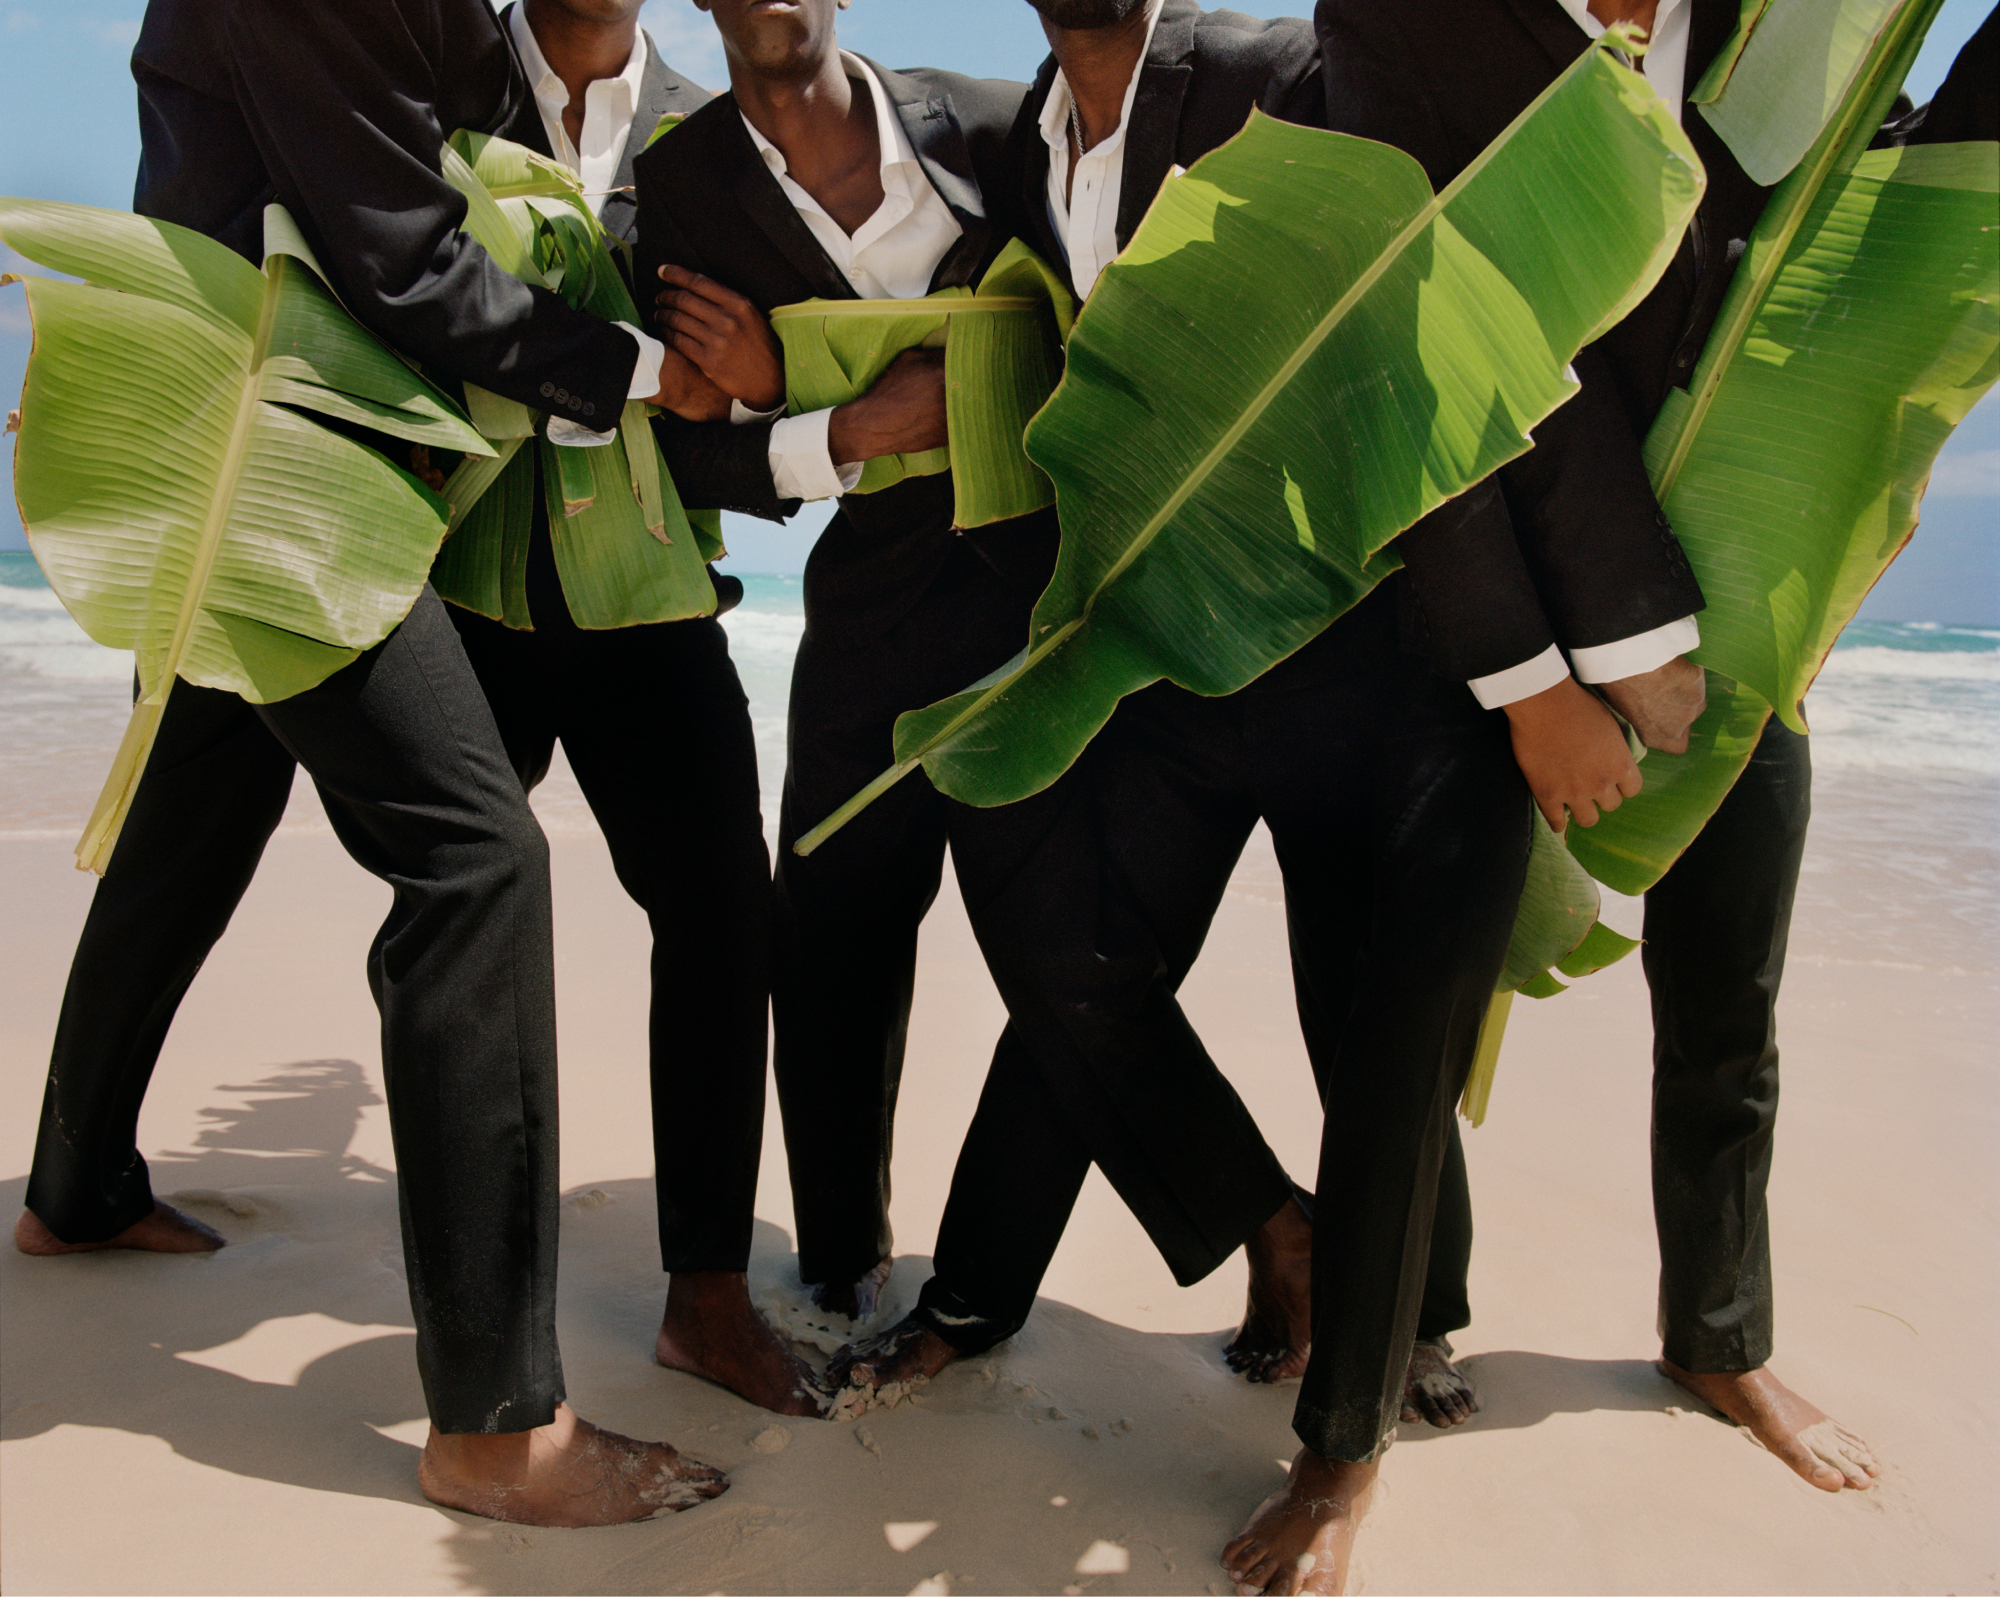 Five men dressed in suits holding palm branches on a beach. 